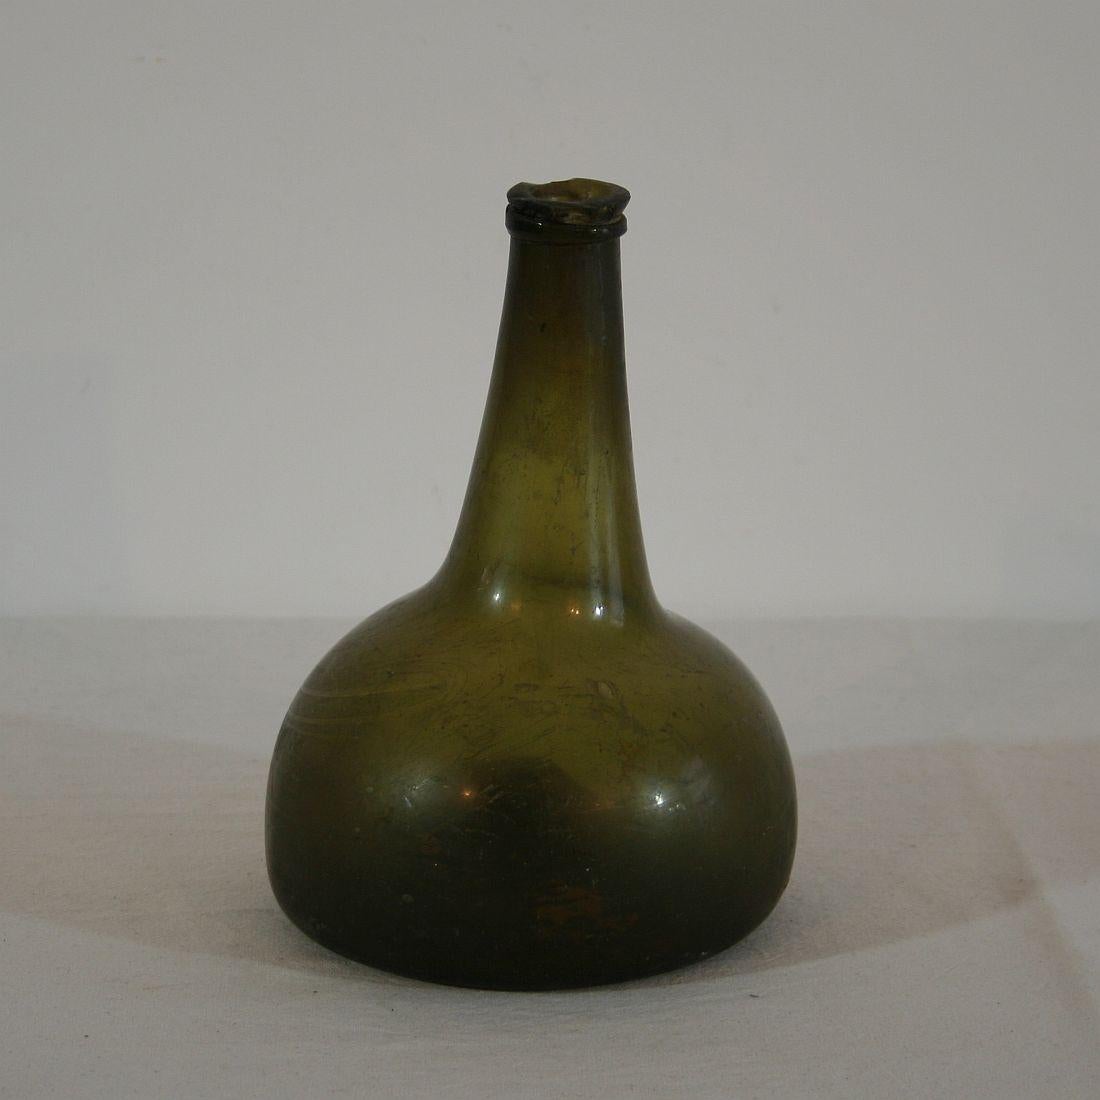 Beautiful early 18th century Dutch wine bottle (onion bottle) in a nice green color. Surface typical for those found under water, Holland, circa 1700-1750.
Good condition.